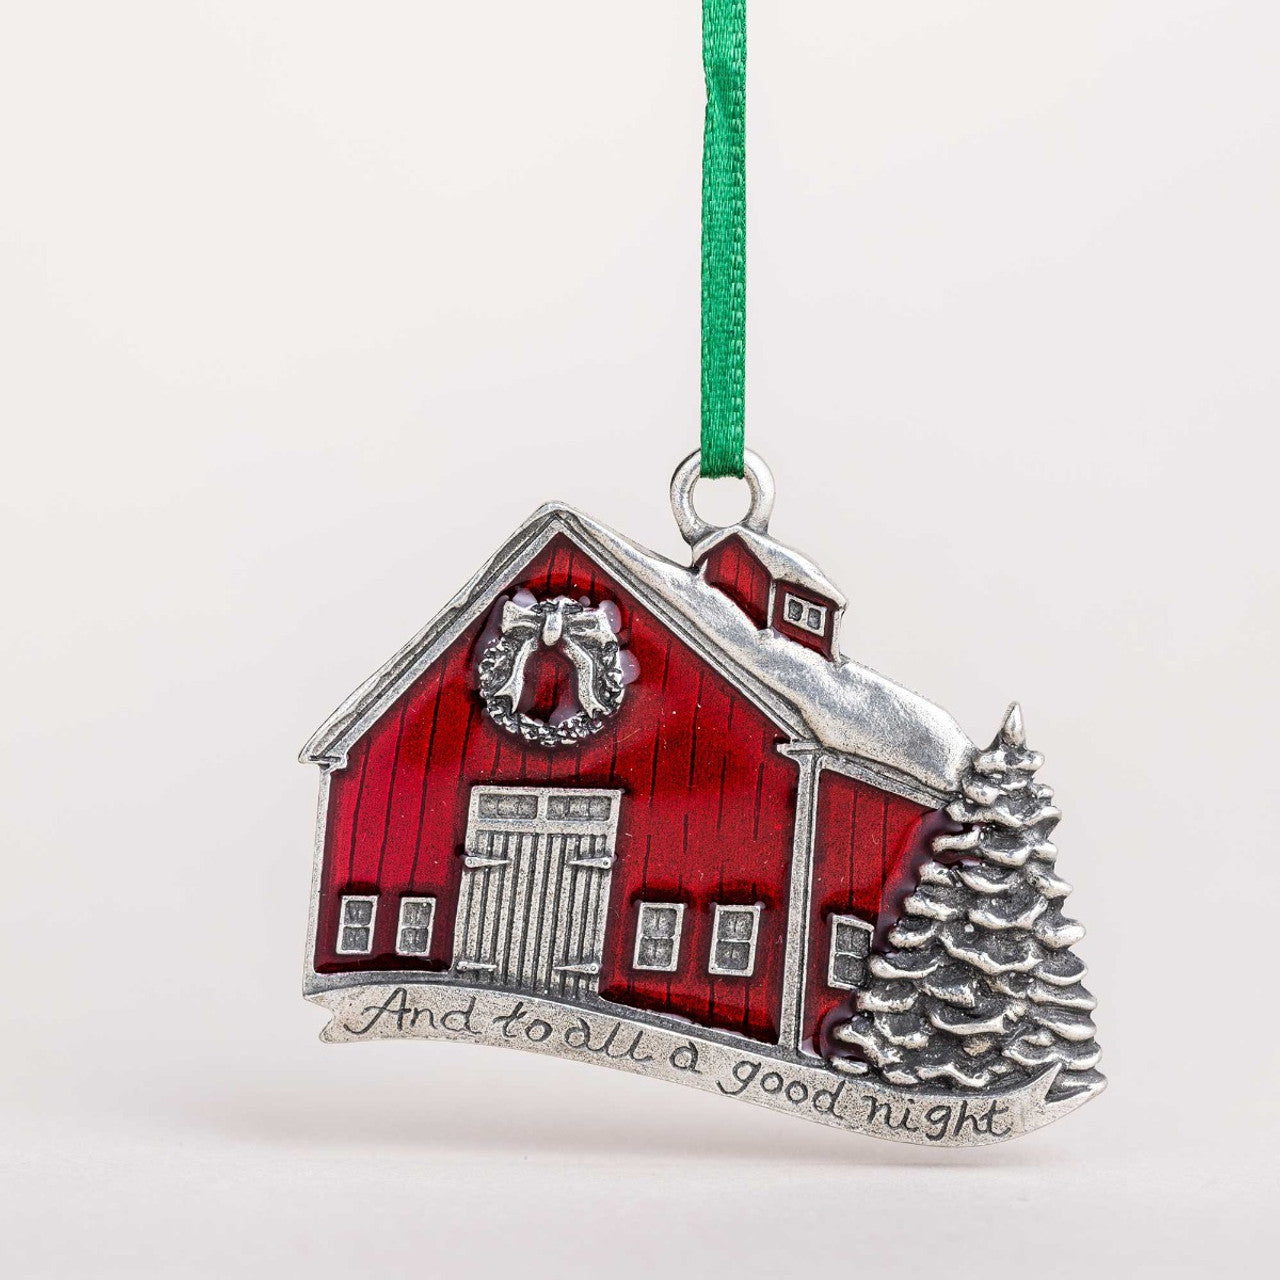 A Good Night 2014 Annual Carded Ornament